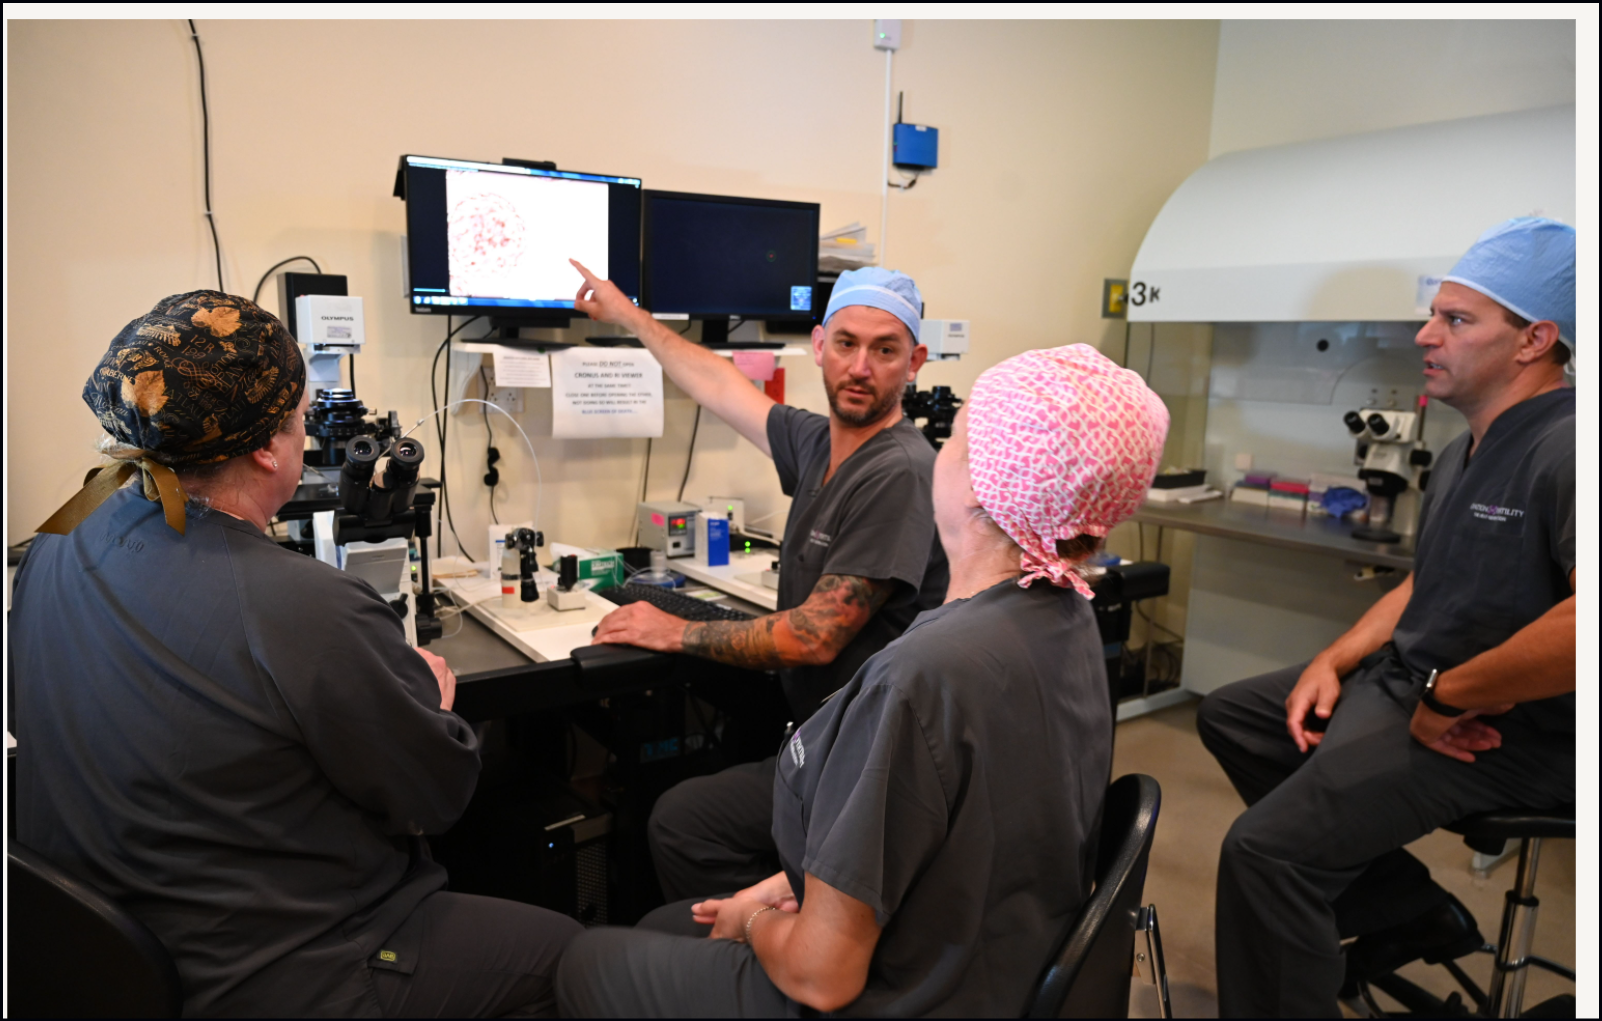 Dr. VerMilyea discusses Presagen’s Life Whisperer AI software with Ovation lab team members and Ovation Chief Executive Officer Paul Kappelman (right). 